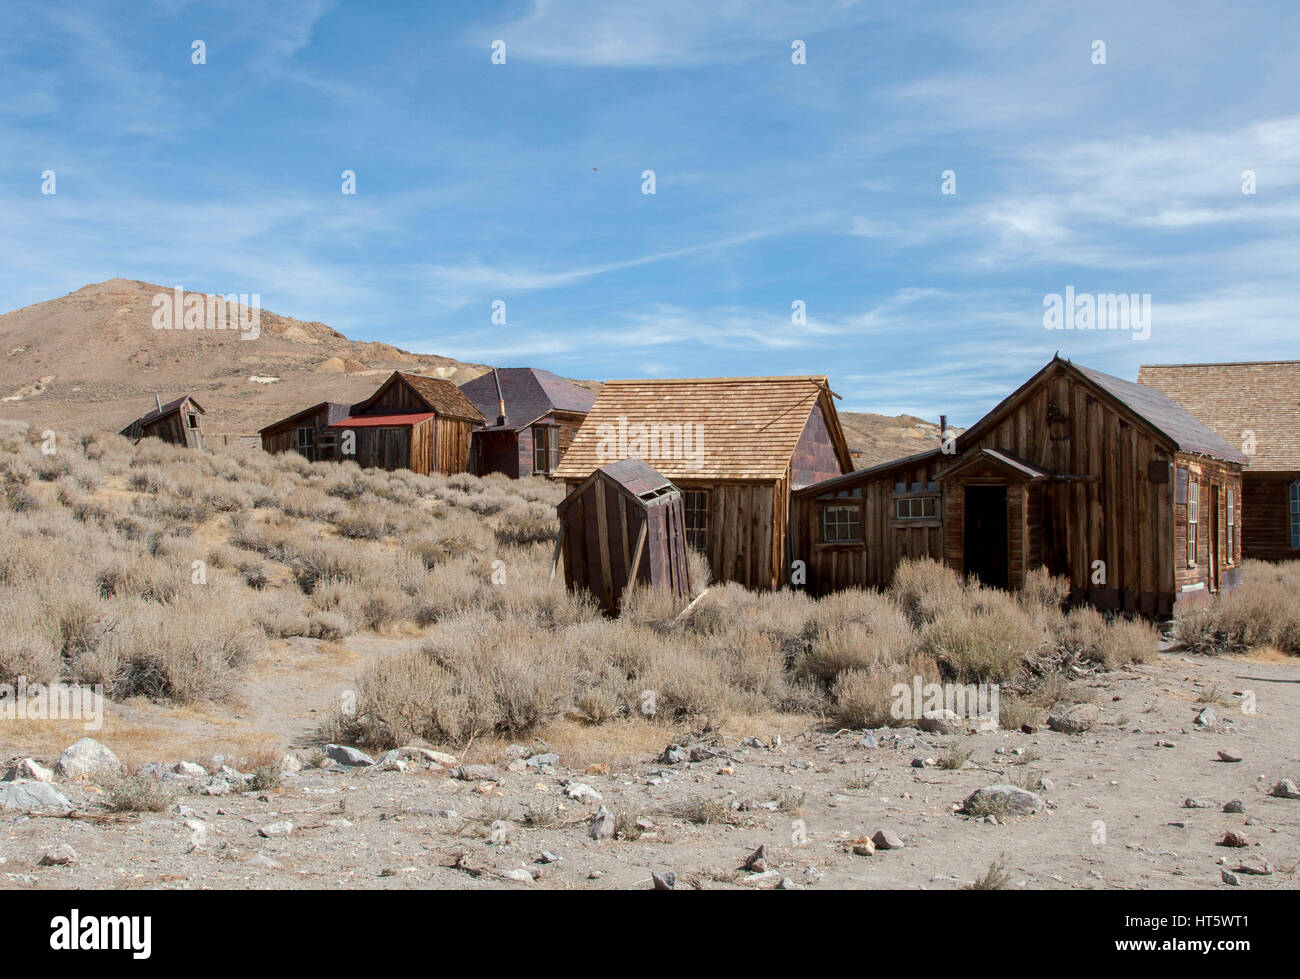 The Bodie State Park is the remains of Bodie, a silver and copper mining town in the eastern California desert. Stock Photo